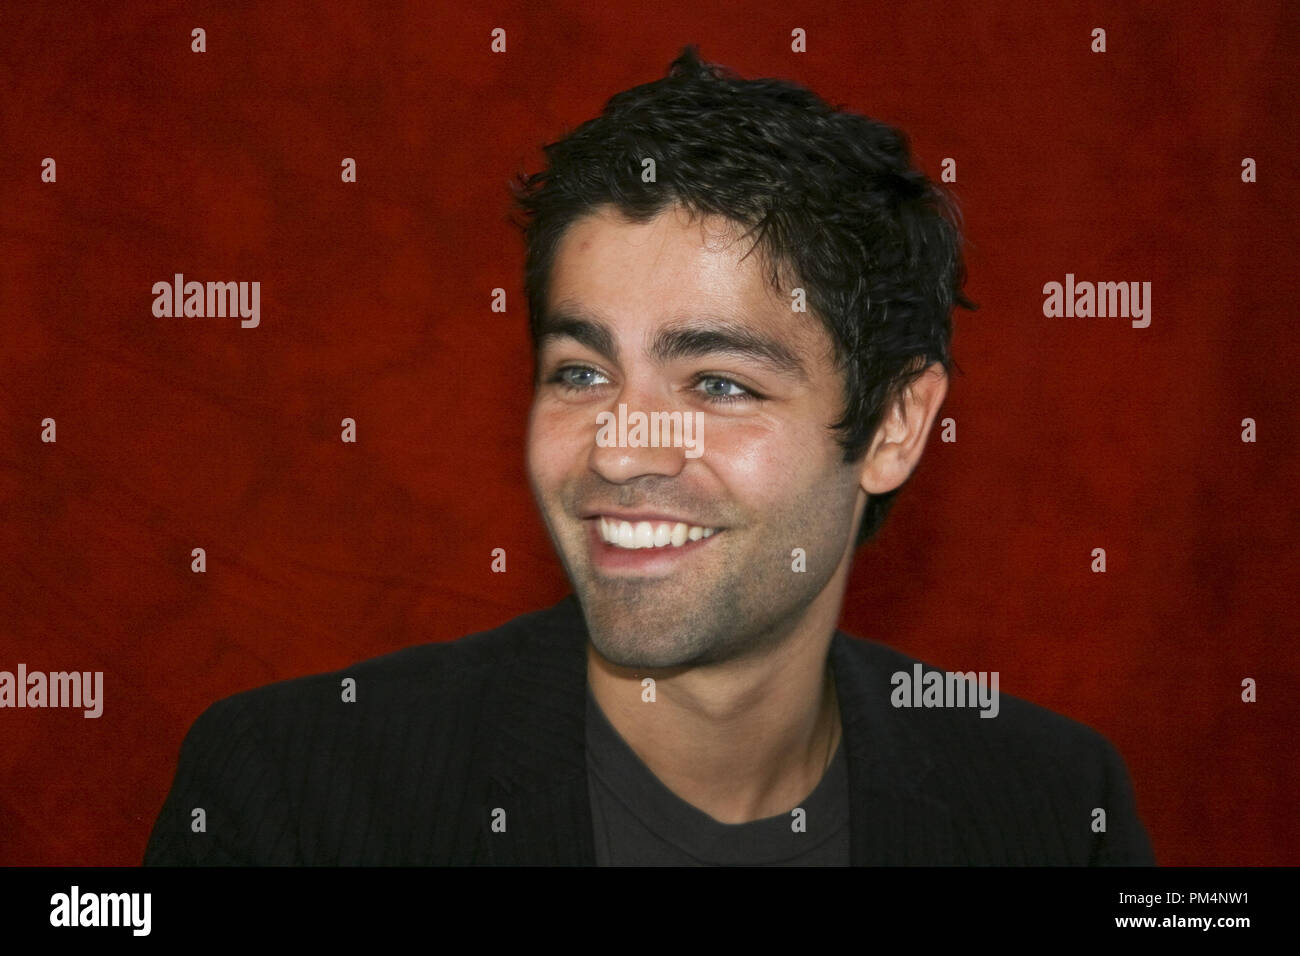 Adrian Grenier 'Teenage Paparazzo' Portrait Session, August 16, 2010.  Reproduction by American tabloids is absolutely forbidden. File Reference # 30445 010JRC  For Editorial Use Only -  All Rights Reserved Stock Photo